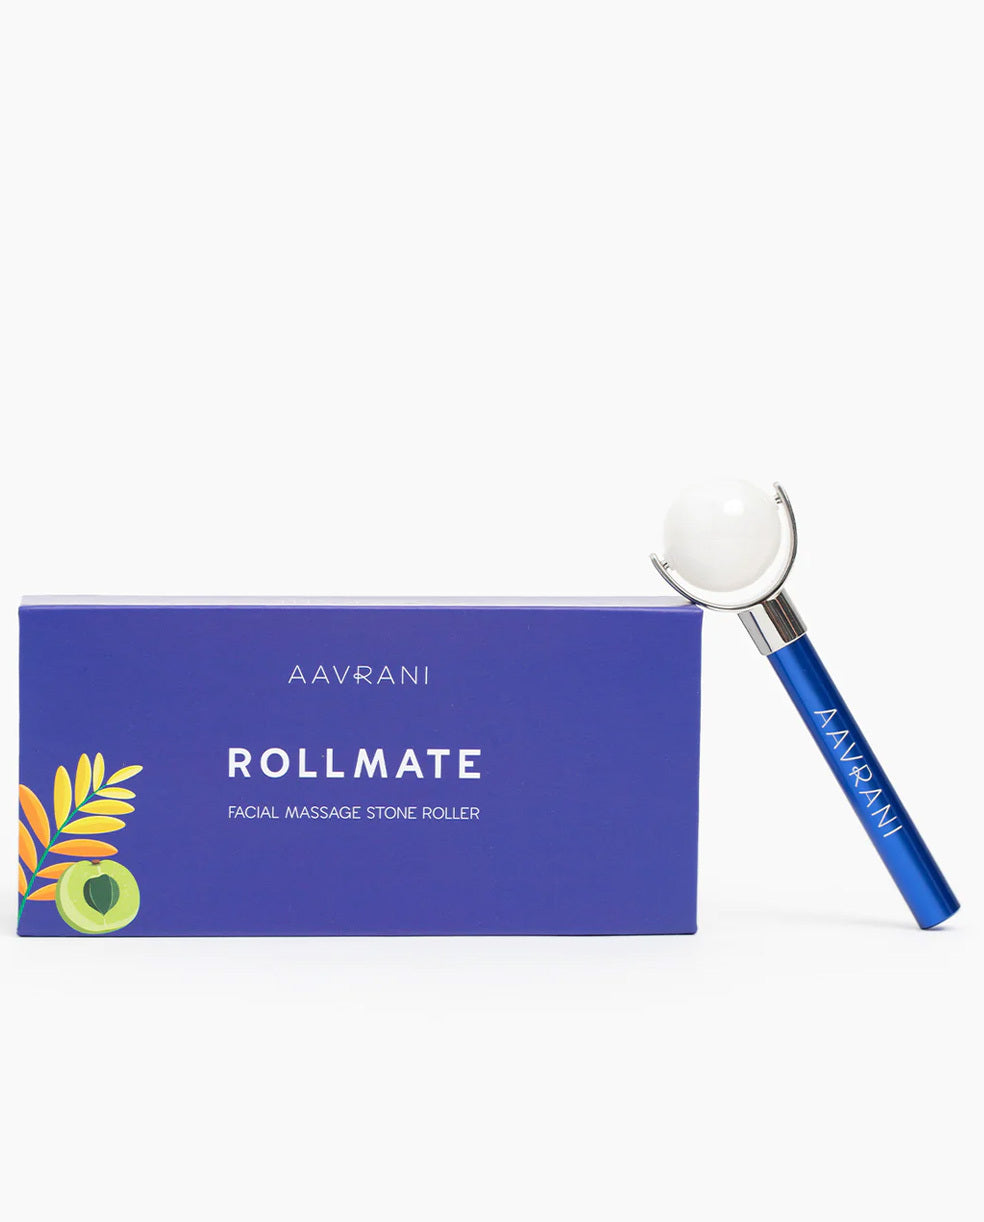 AAVRANI Rollmate Facial Roller against grey background